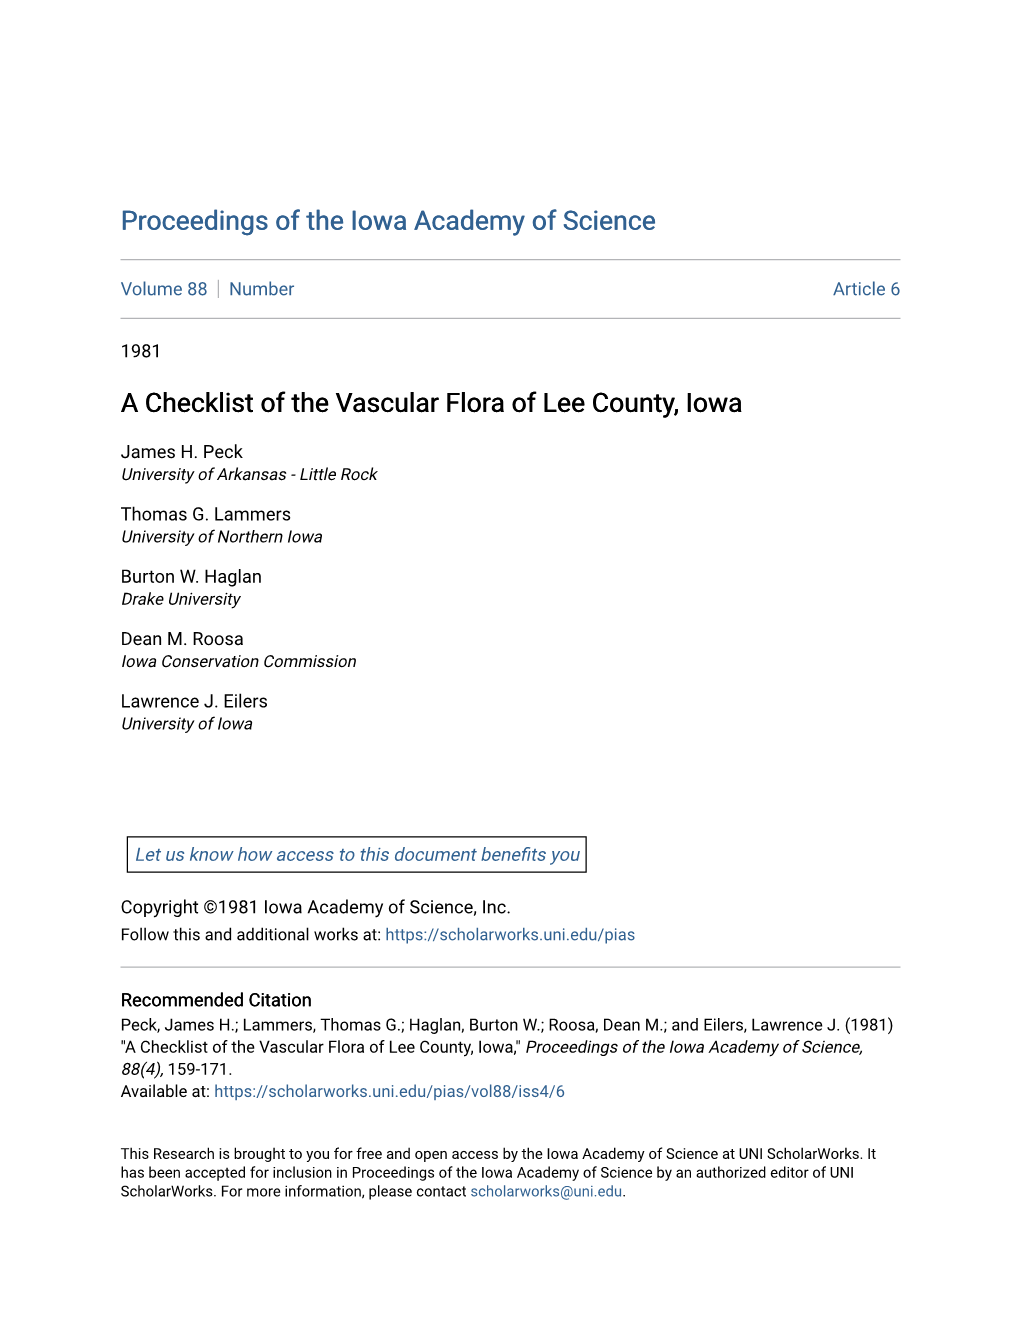 A Checklist of the Vascular Flora of Lee County, Iowa